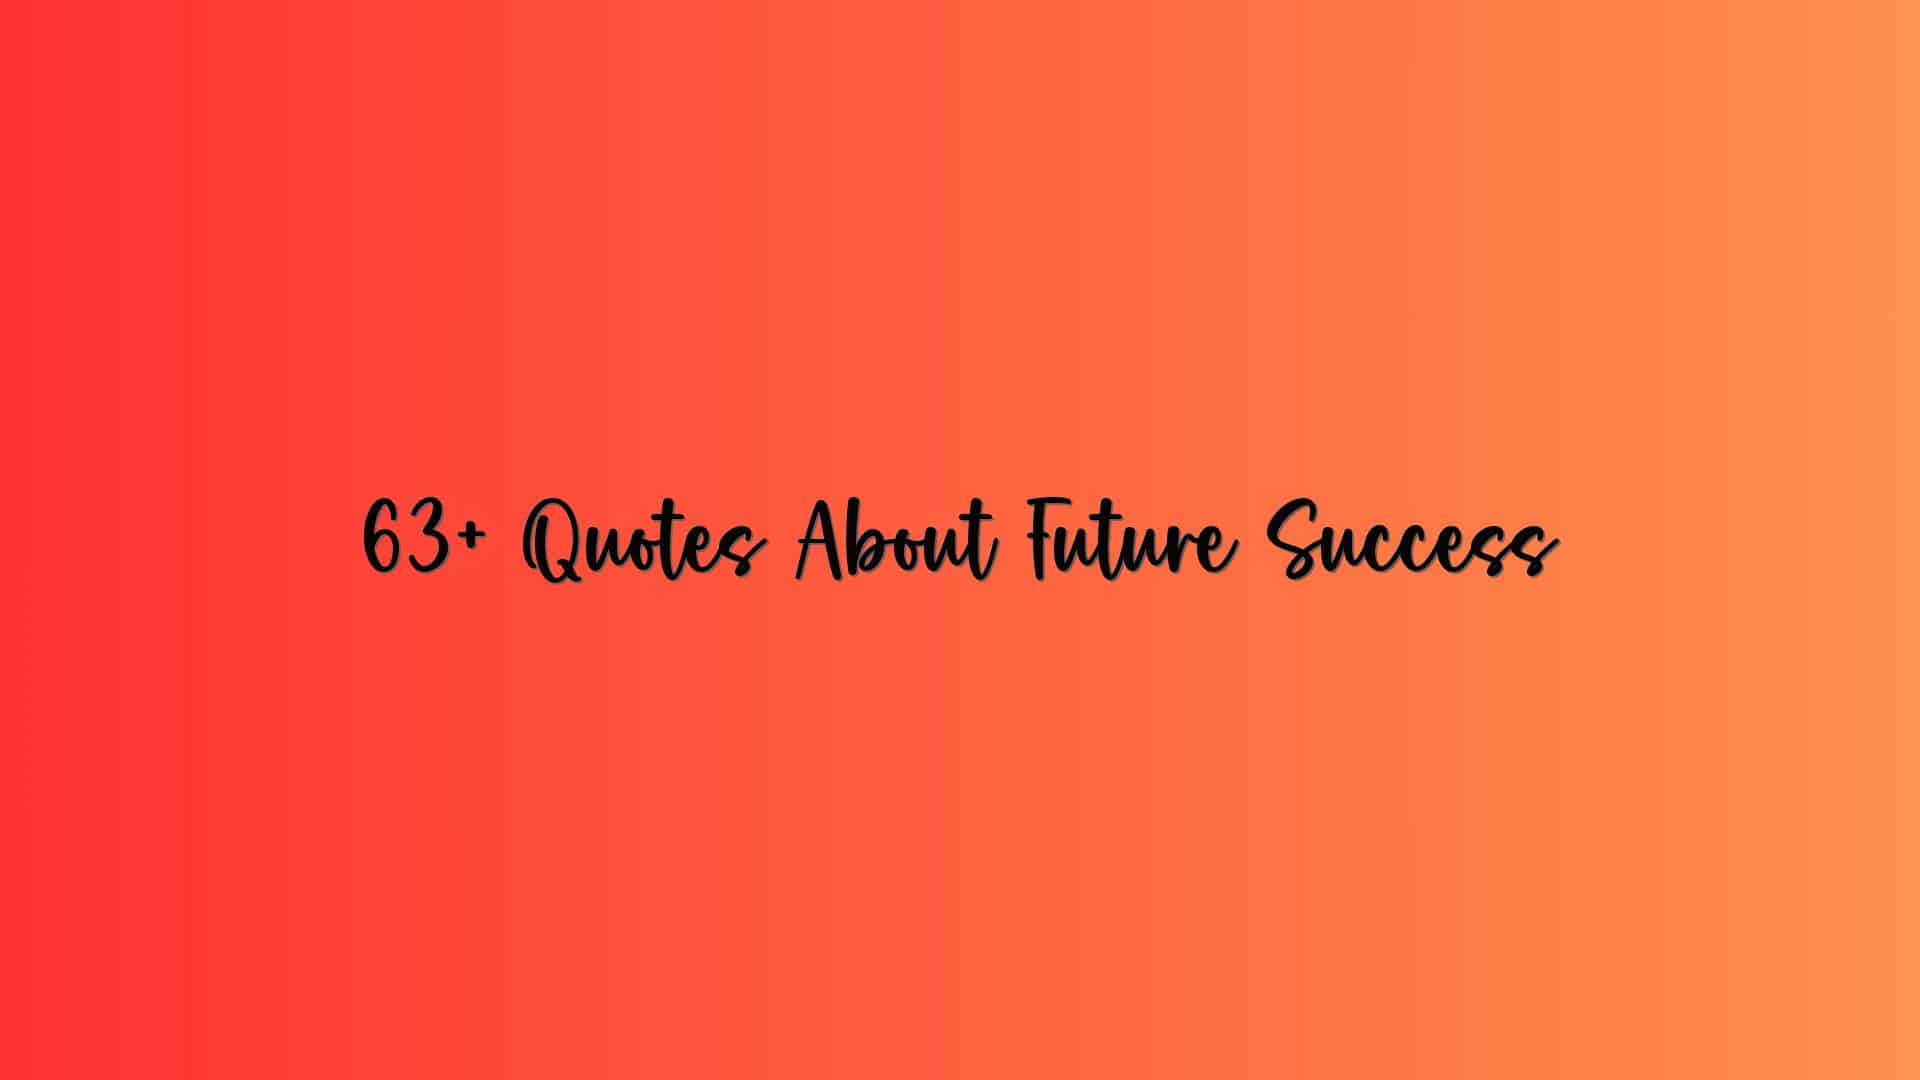 63+ Quotes About Future Success